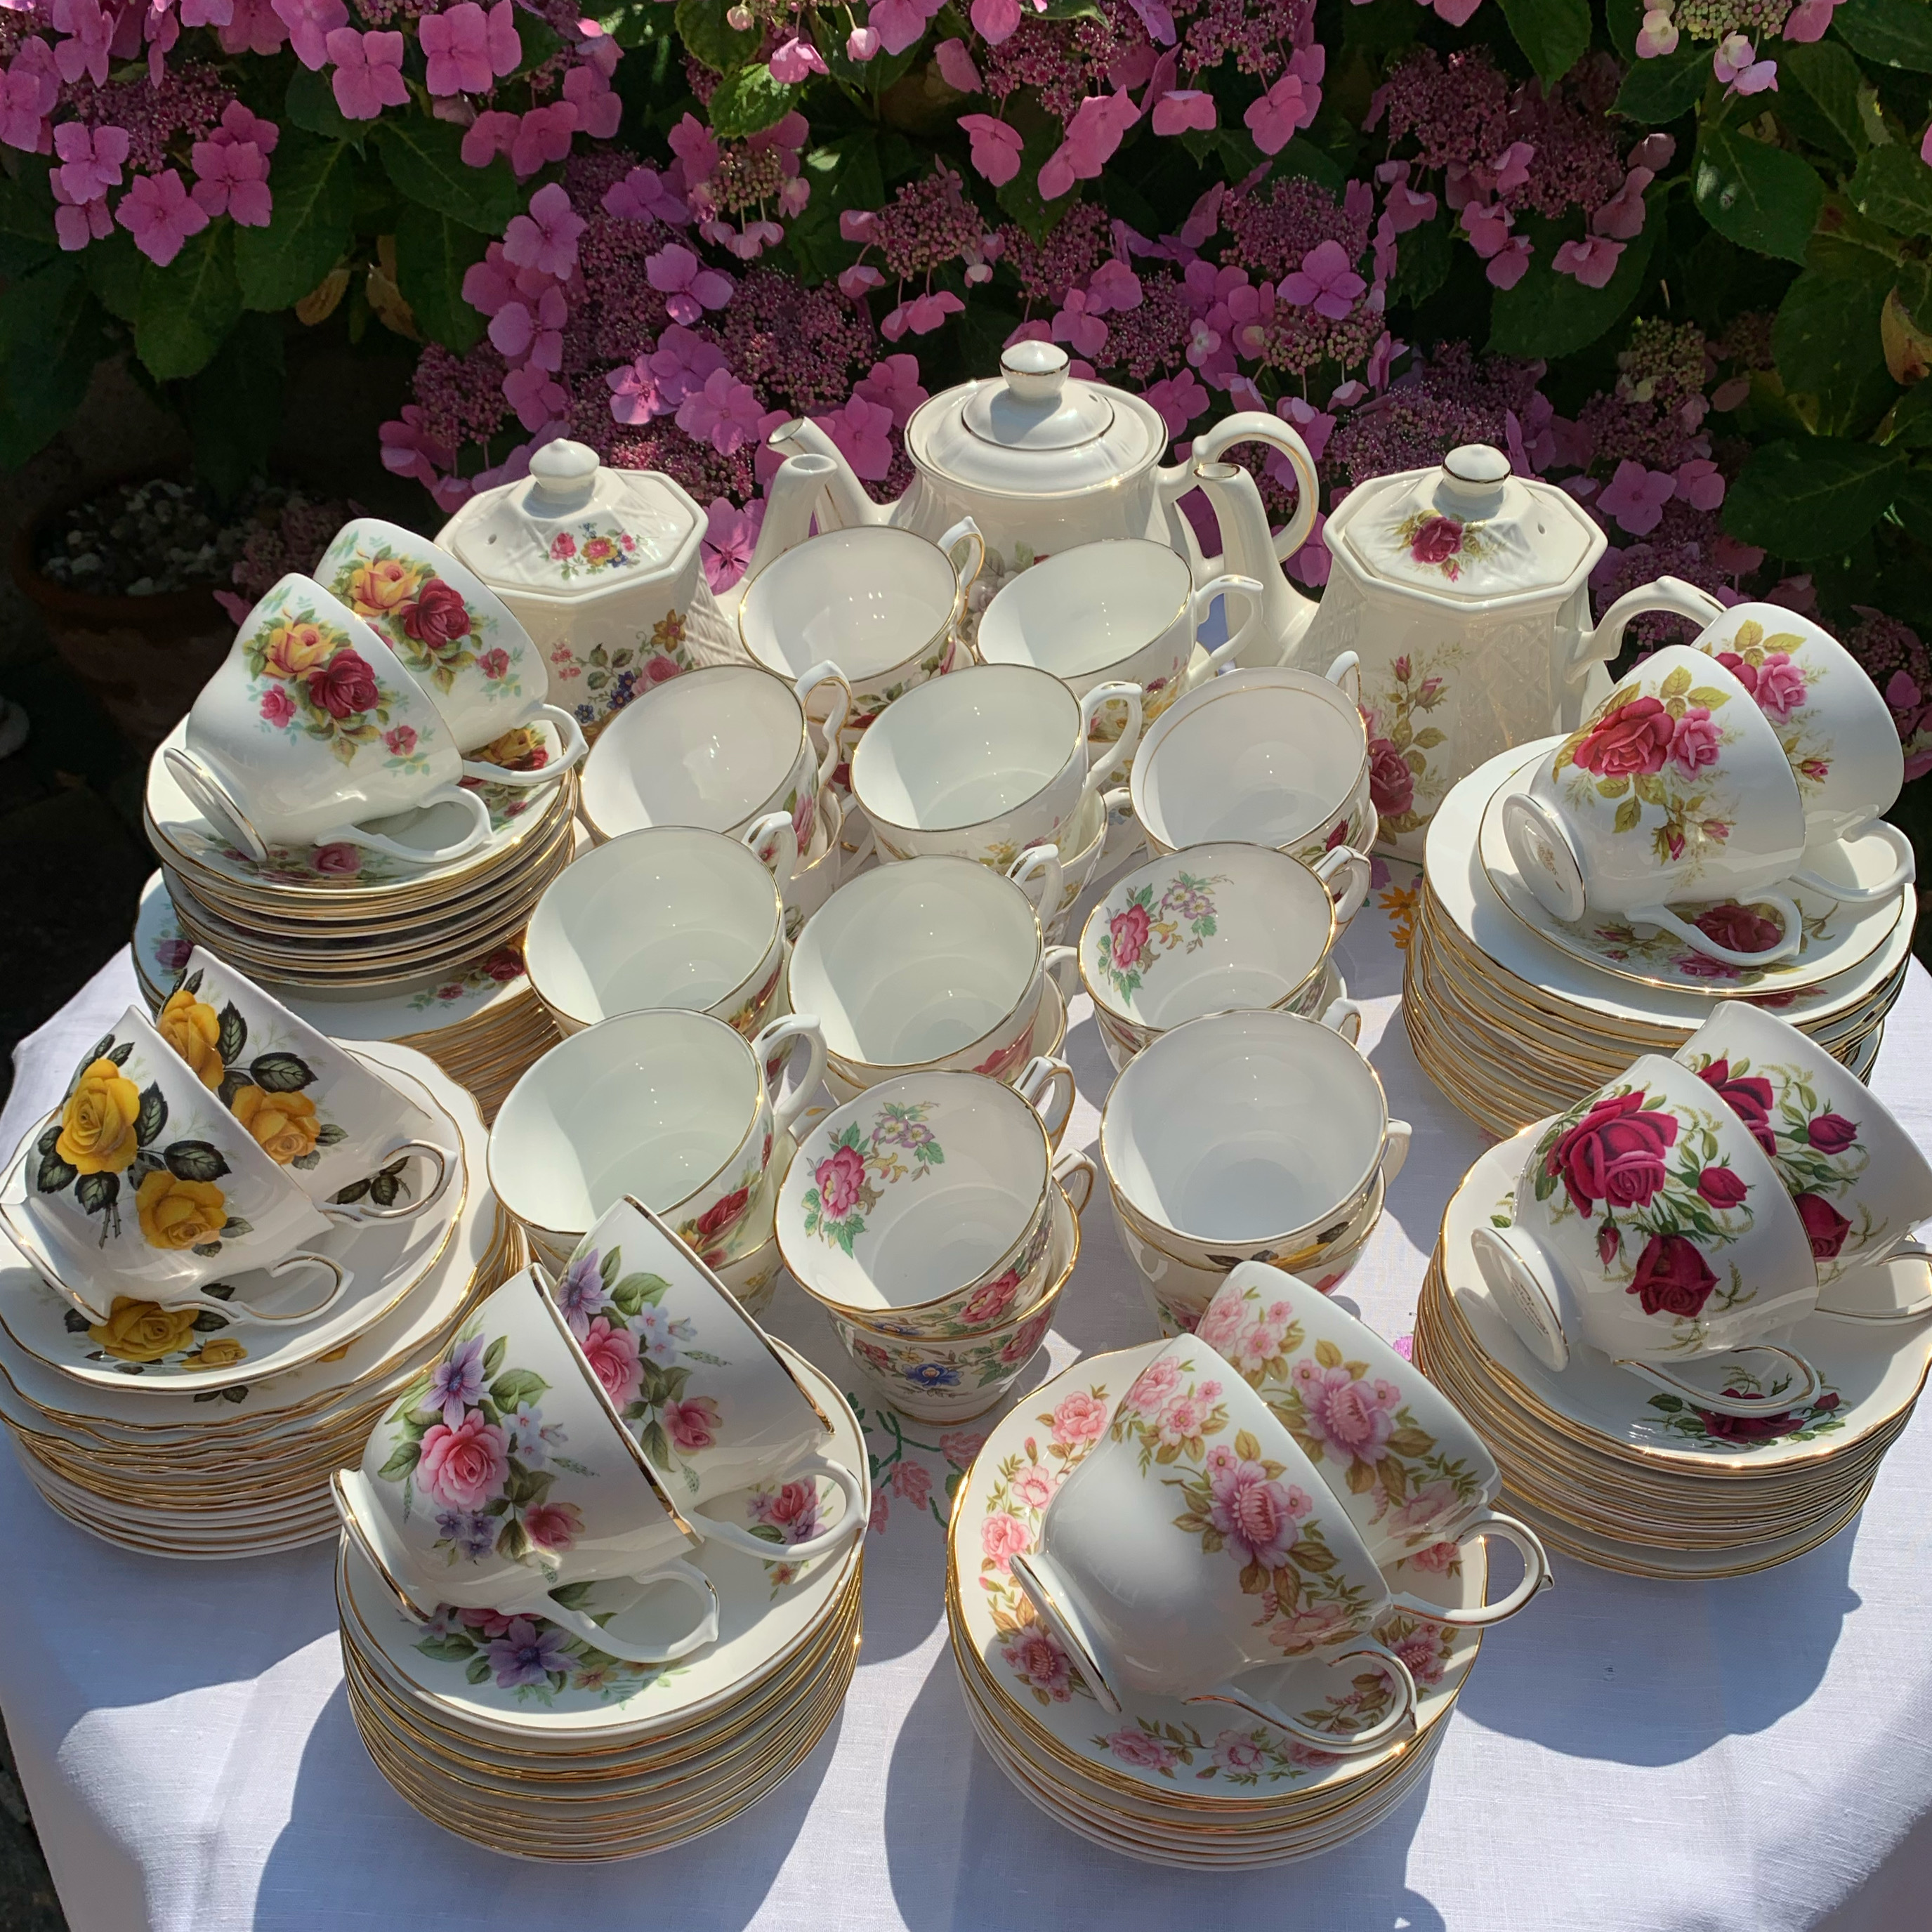 Vintage China Hire - Brentwood Essex